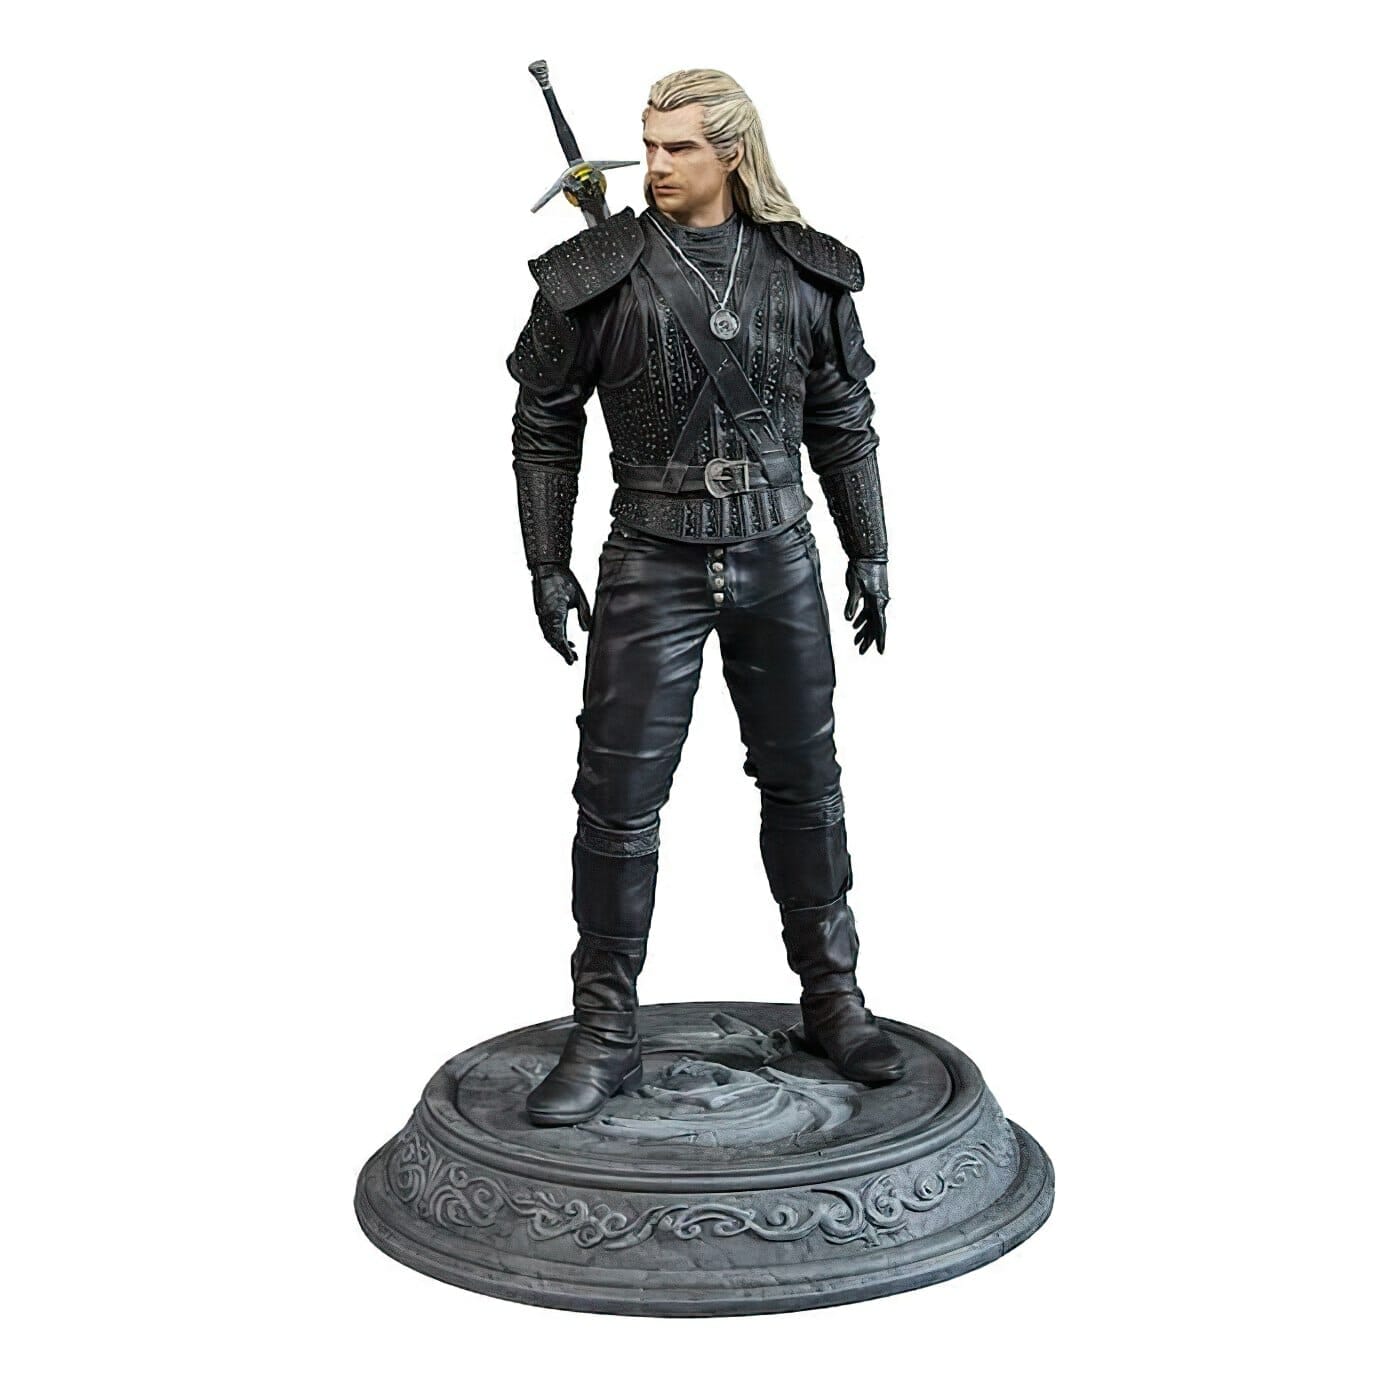 The Witcher - official Geralt model